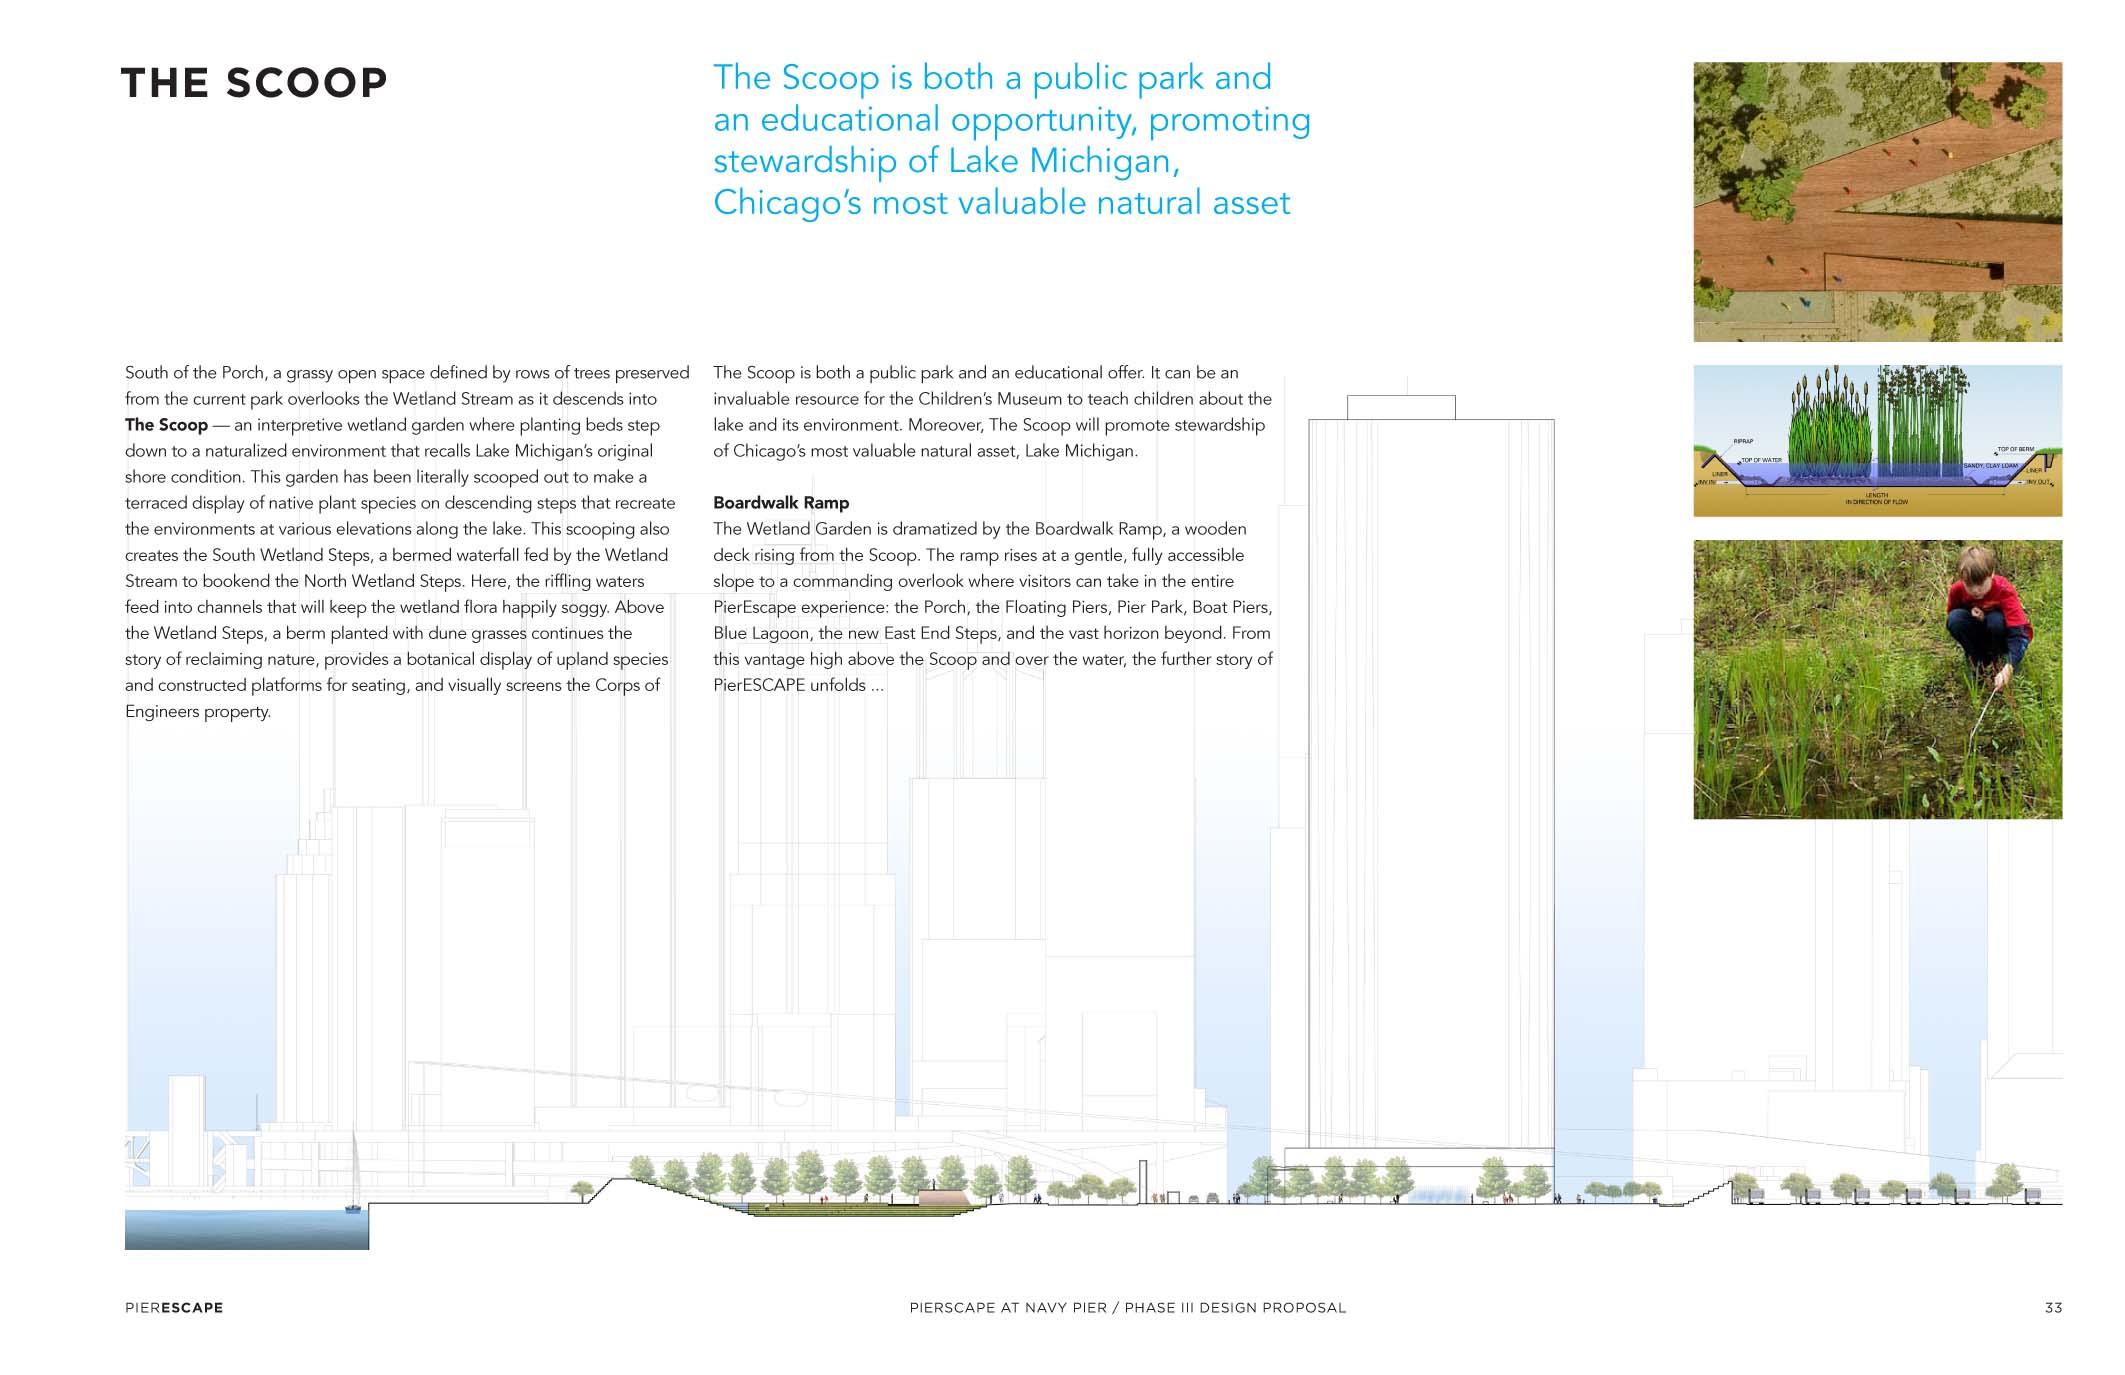 the page with the title title in it, and some images of people standing in tall grass